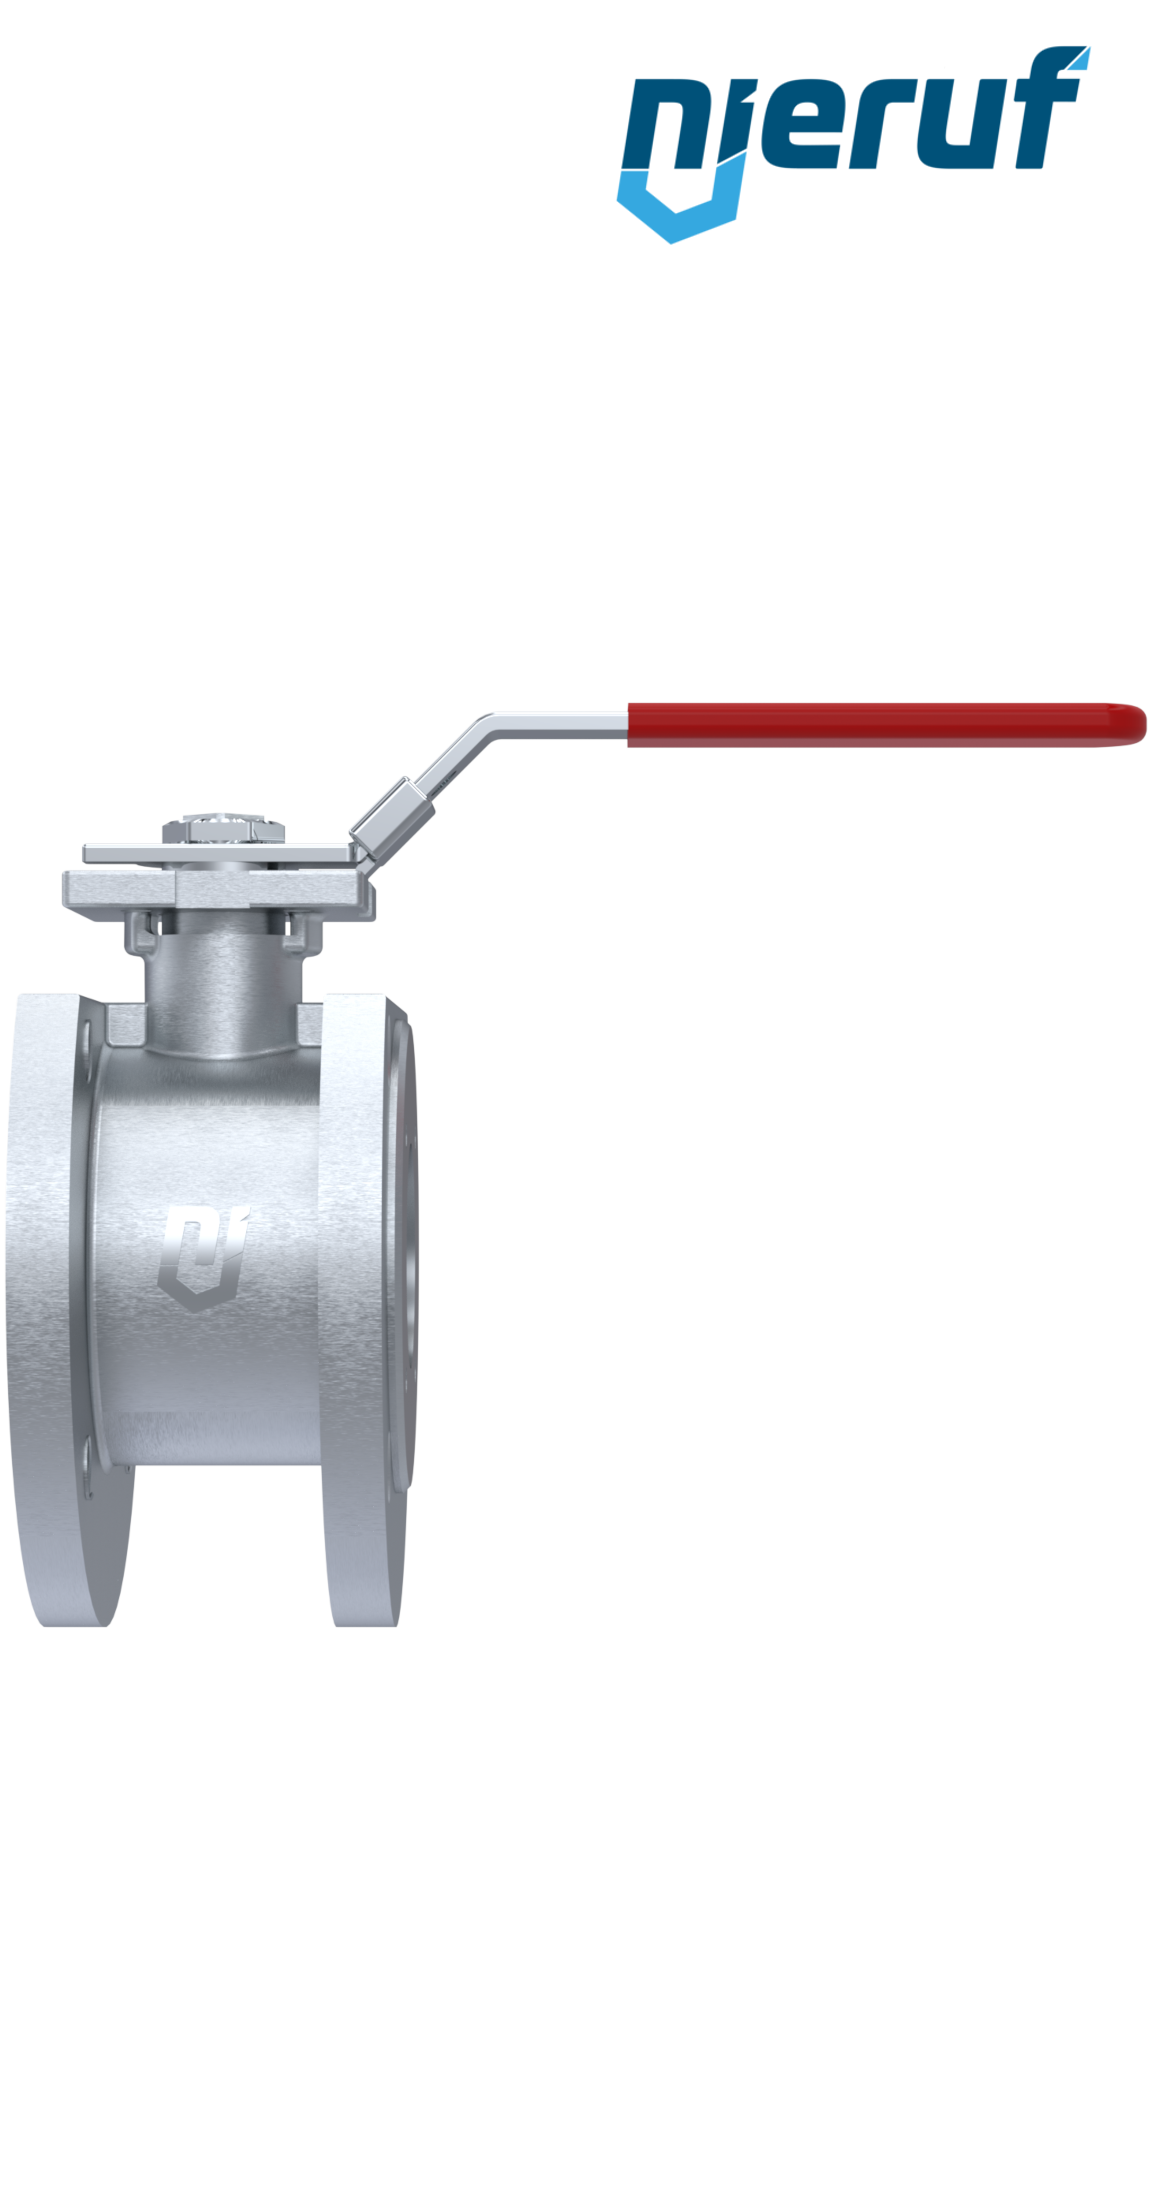 Compact ball valve stainless steel DN15 PN16 FK11